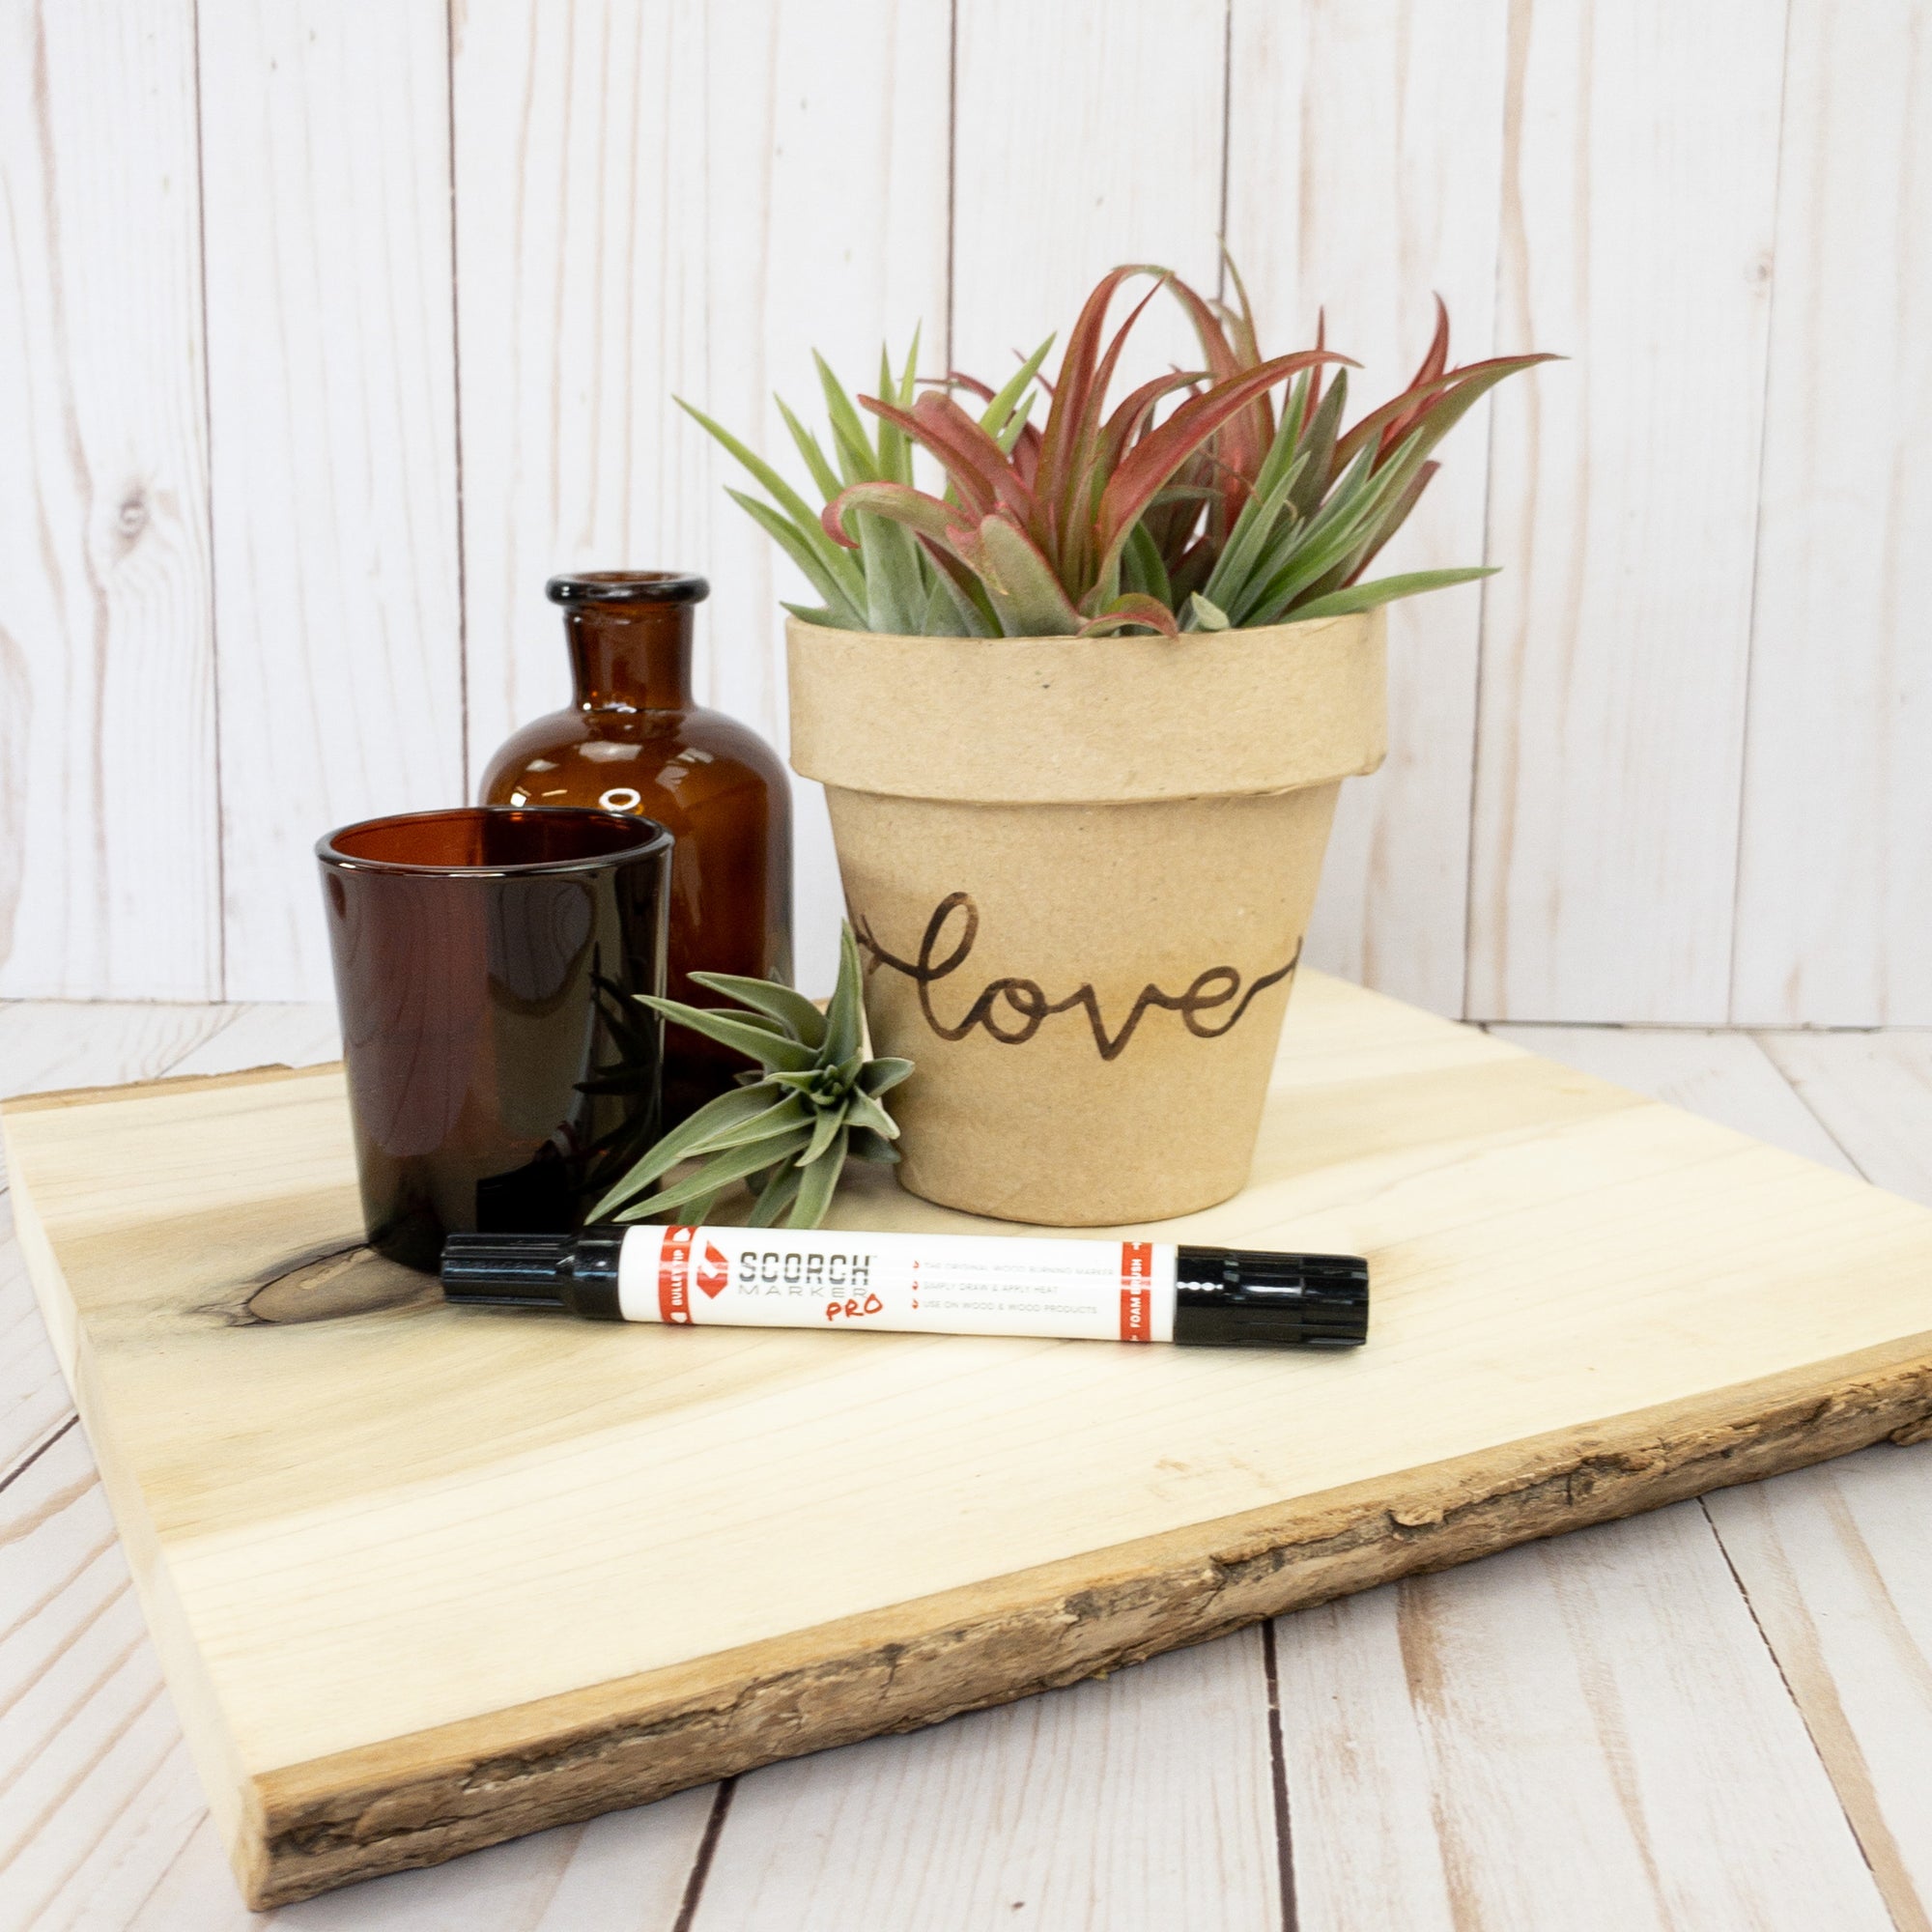 5 Wood Burning Projects that are Perfect for Valentine's Day - Scorch Marker